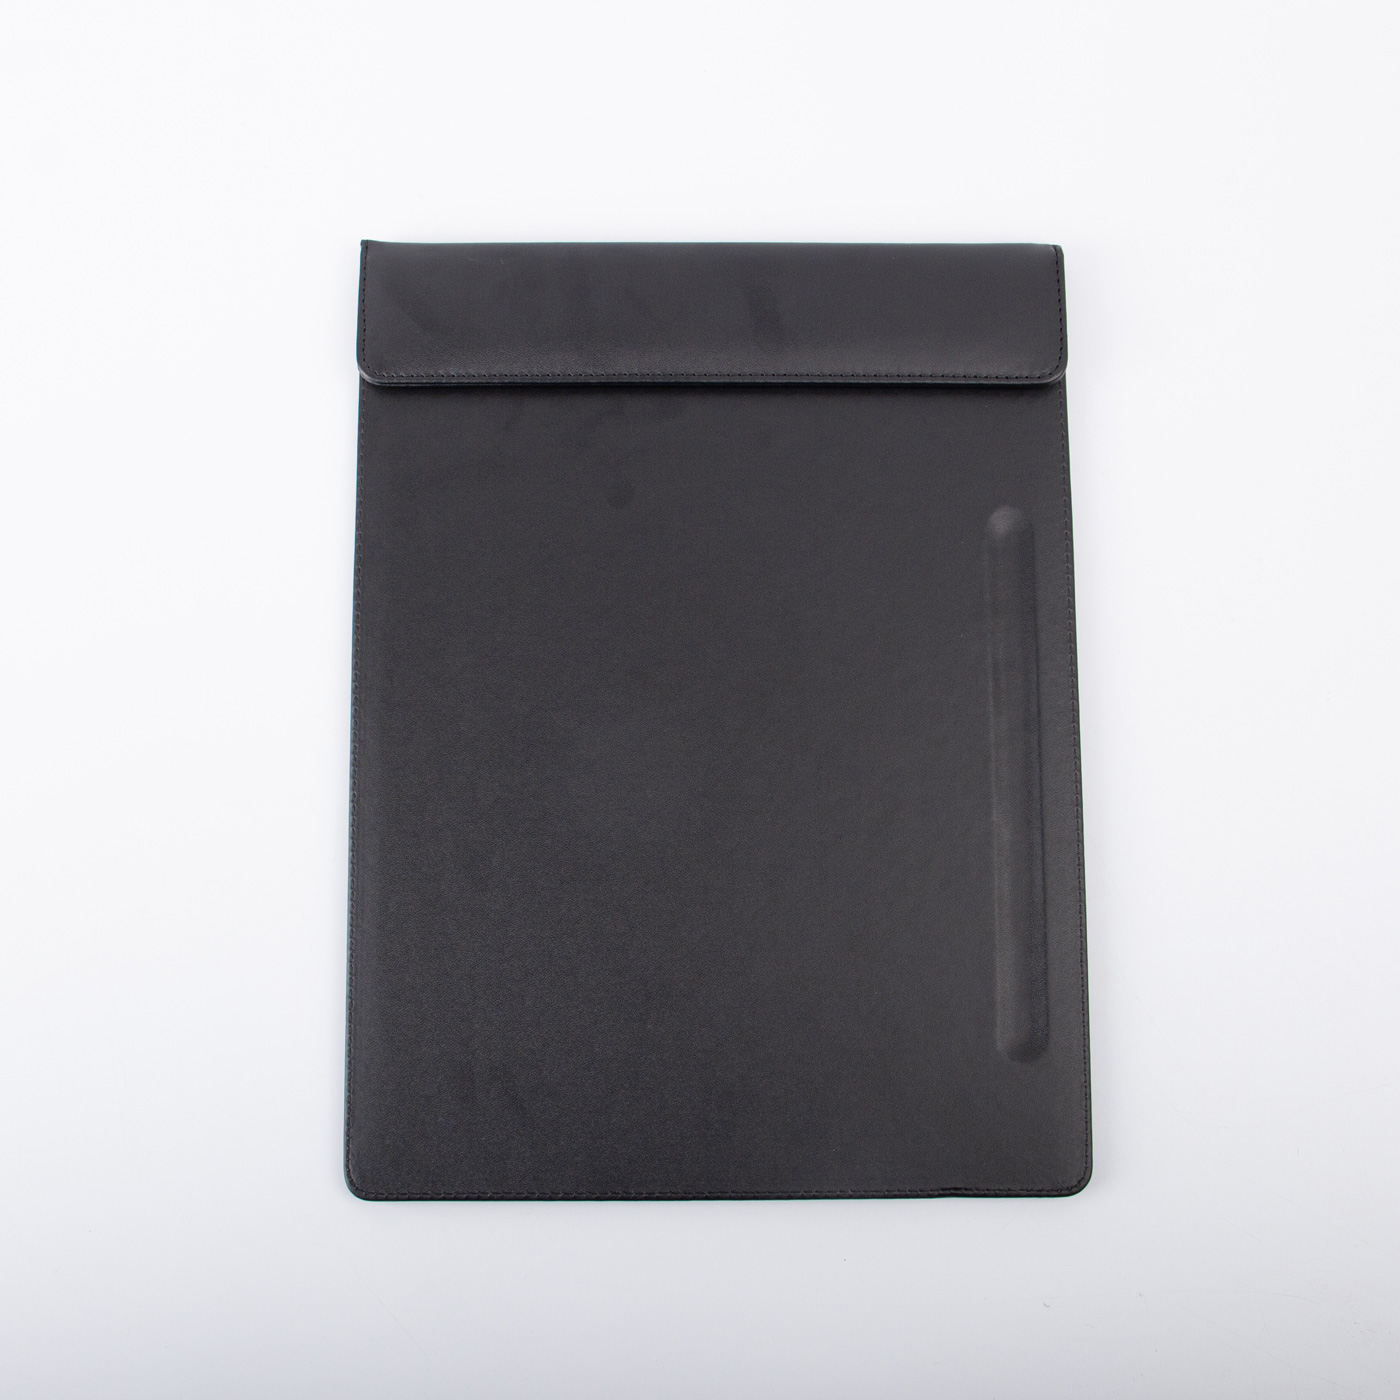 Leather Magnetic Clipboard With Pen Slot4